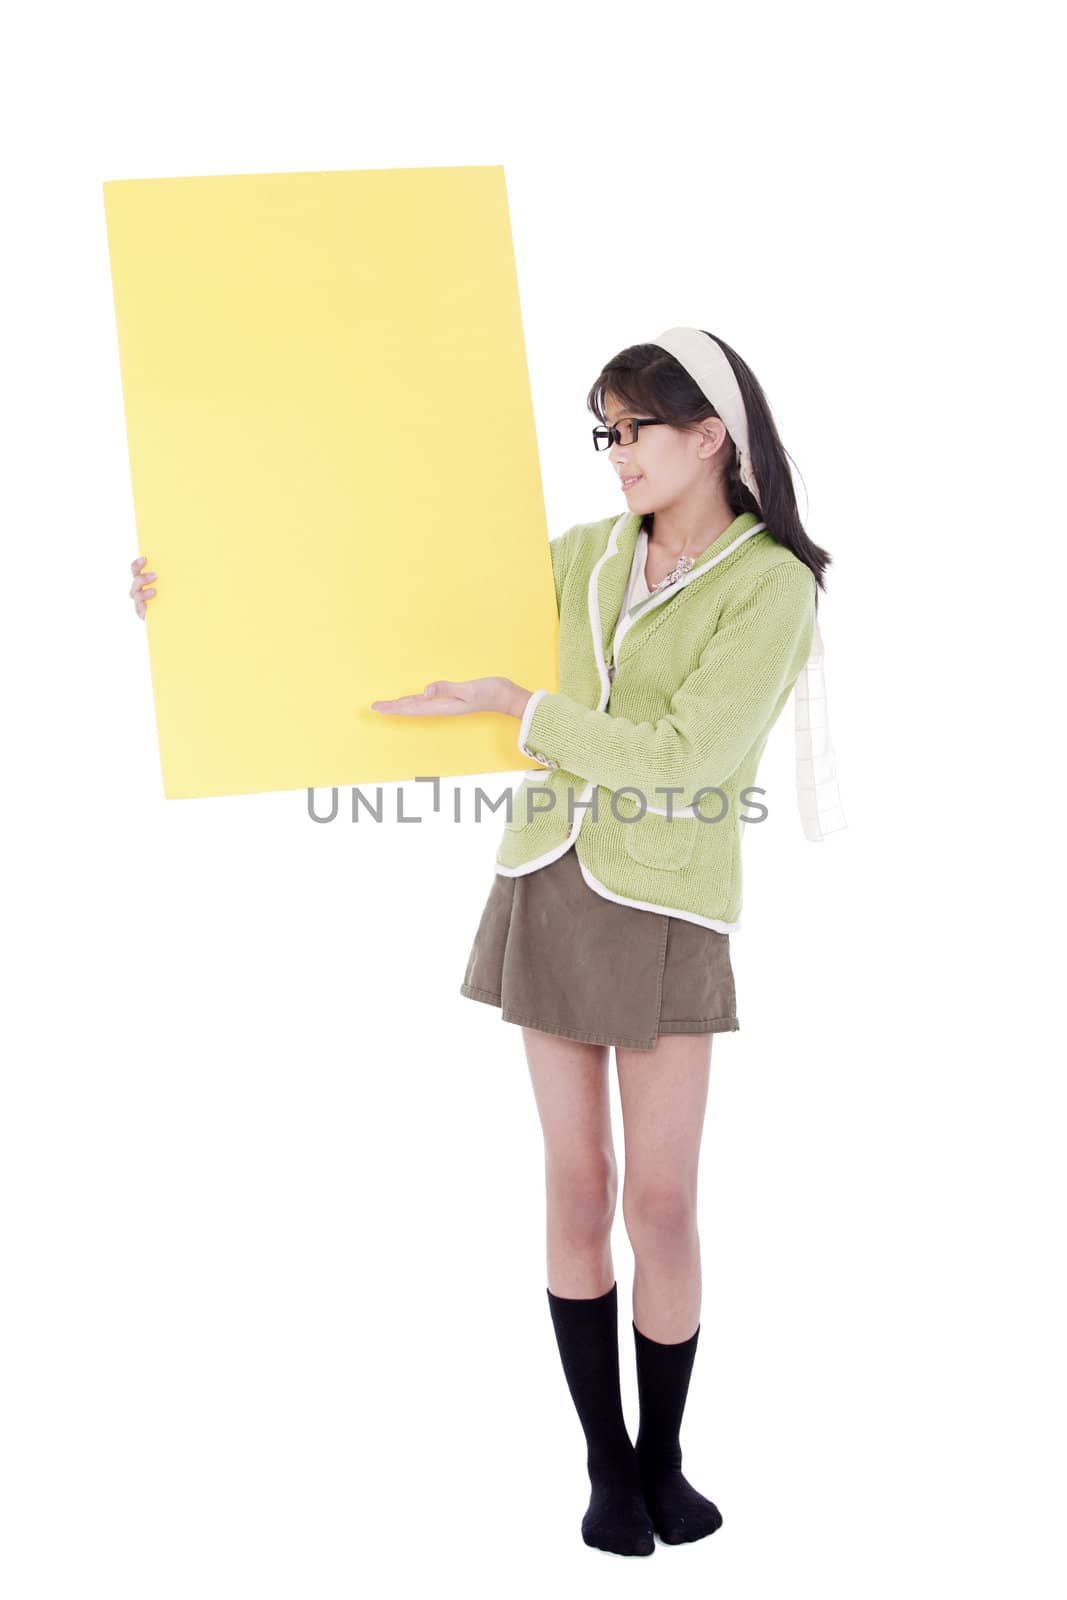 Cute biracial asian girl in green sweater and glasses gesturing to a blank yellow sign, isolated